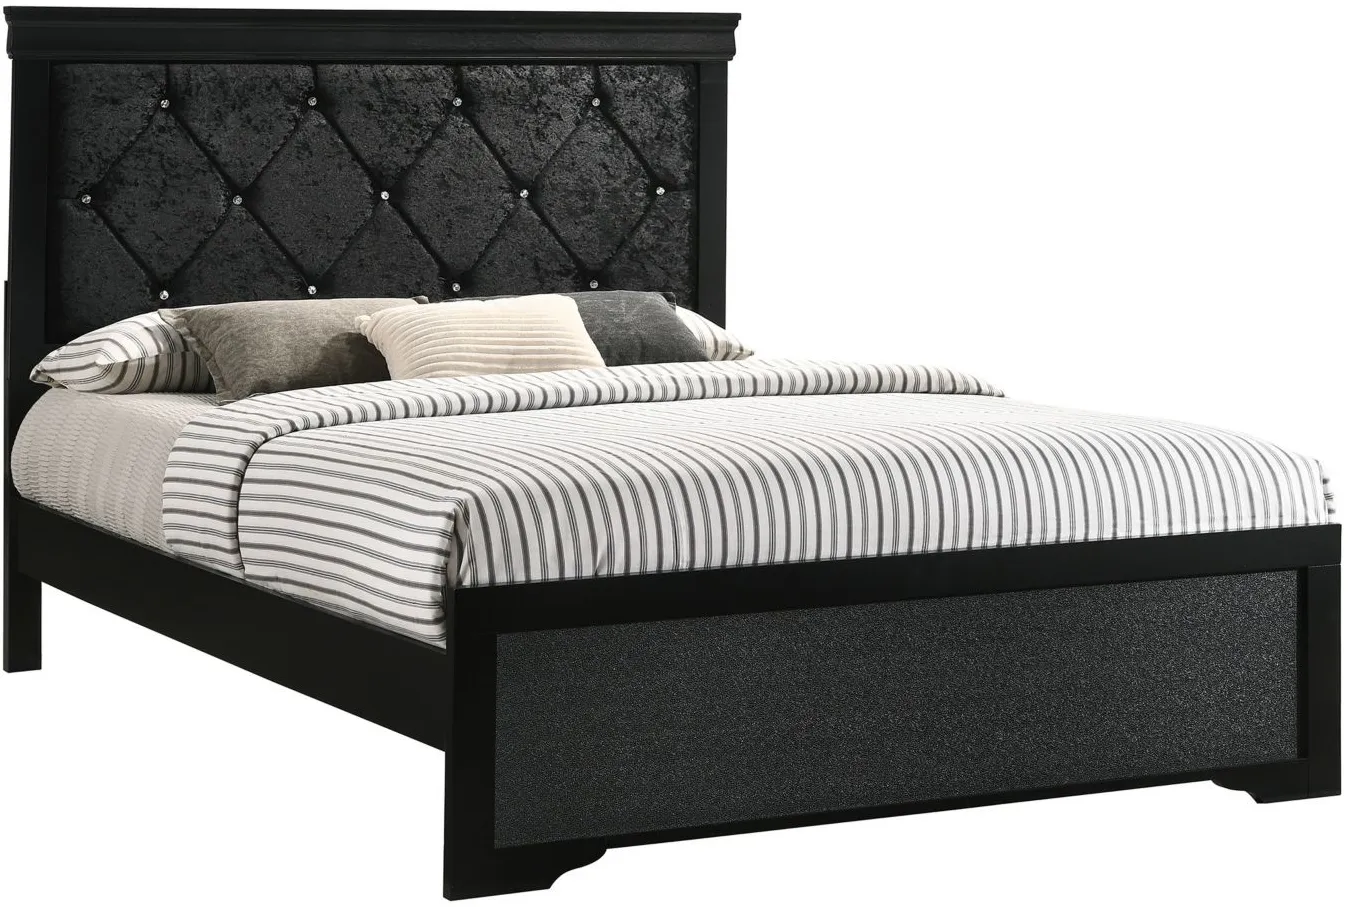 Amalia Upholstered Bed in Black by Crown Mark